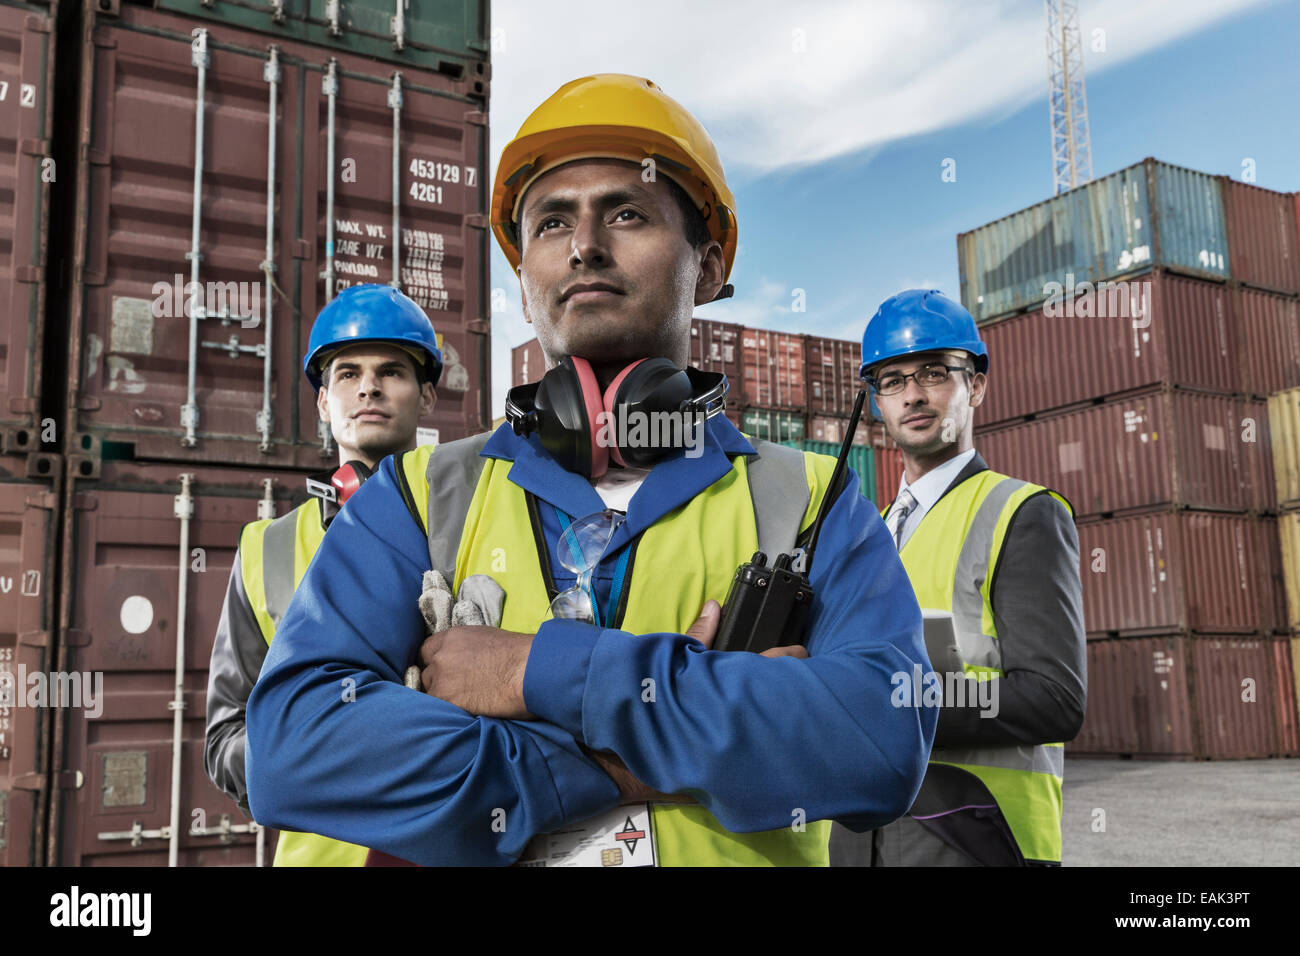 Worker and businessmen standing near cargo containers Stock Photo